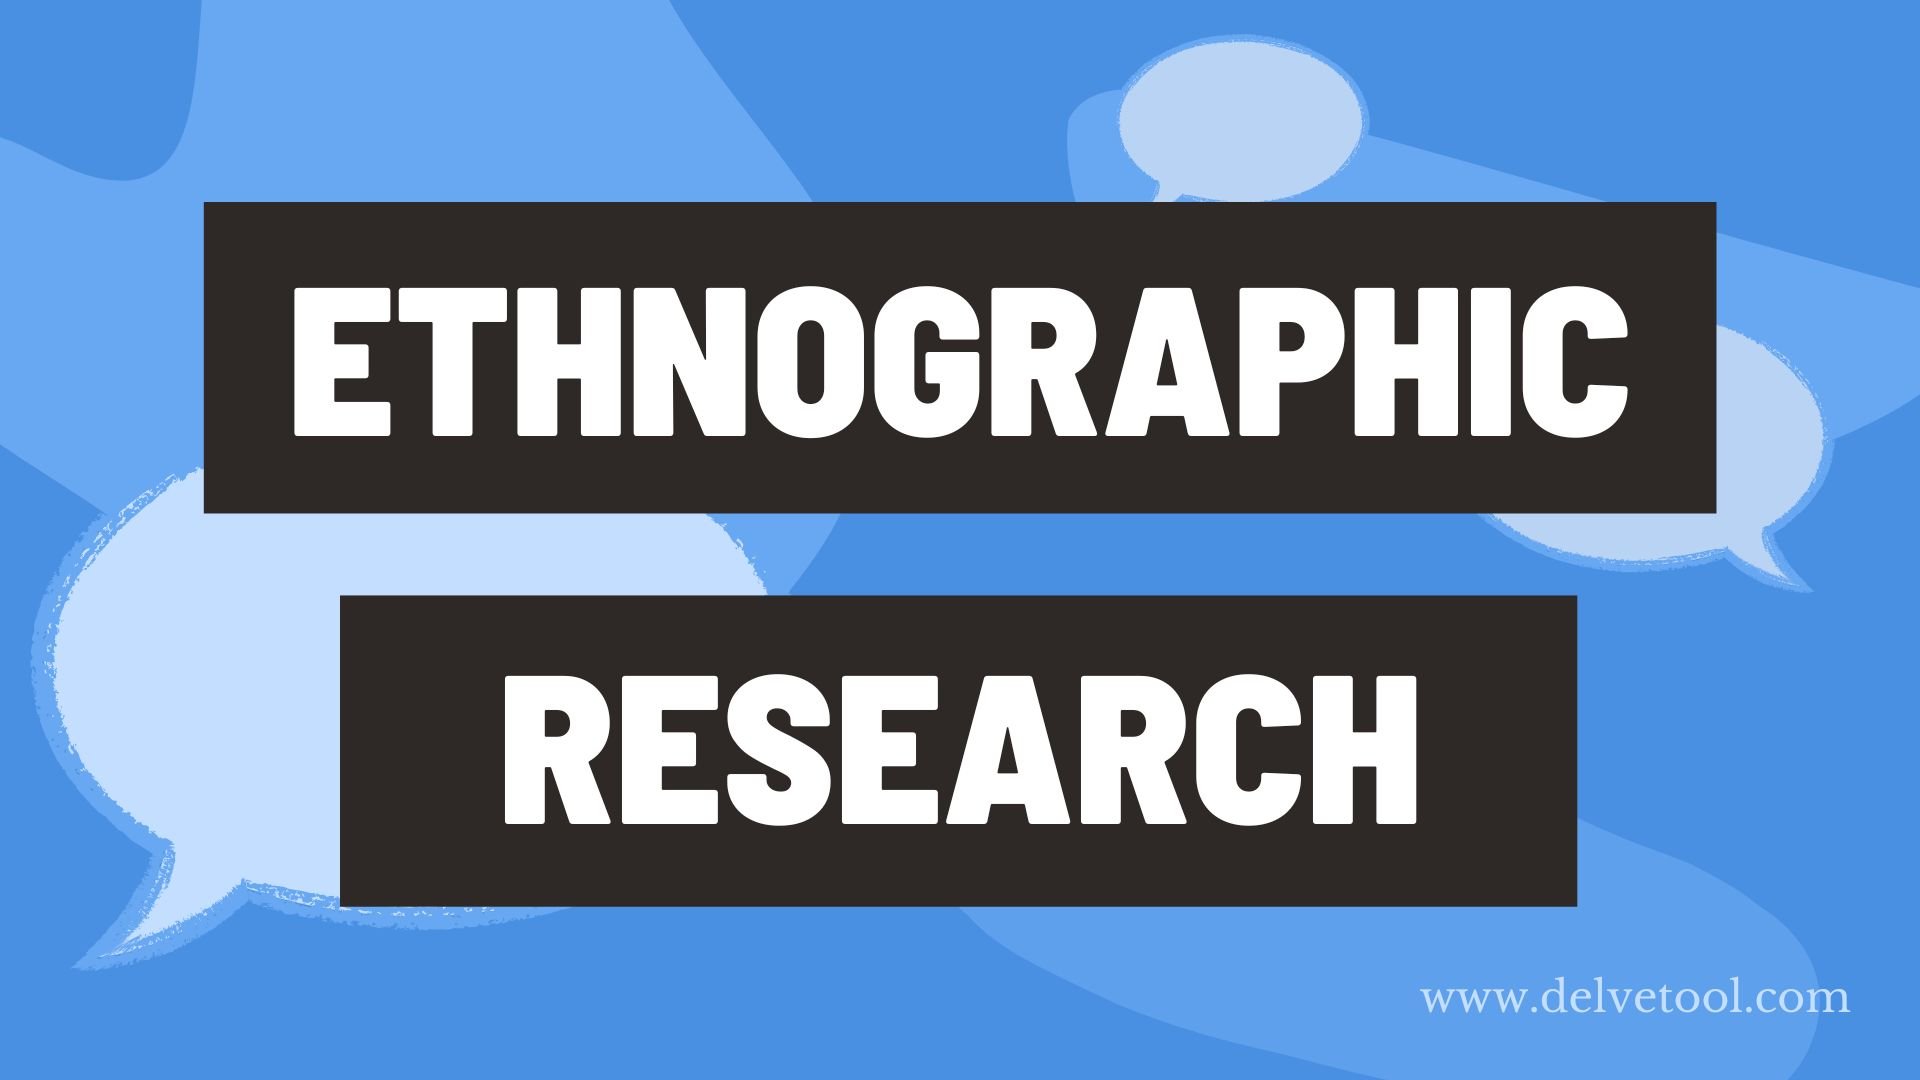 qualitative research in ethnography